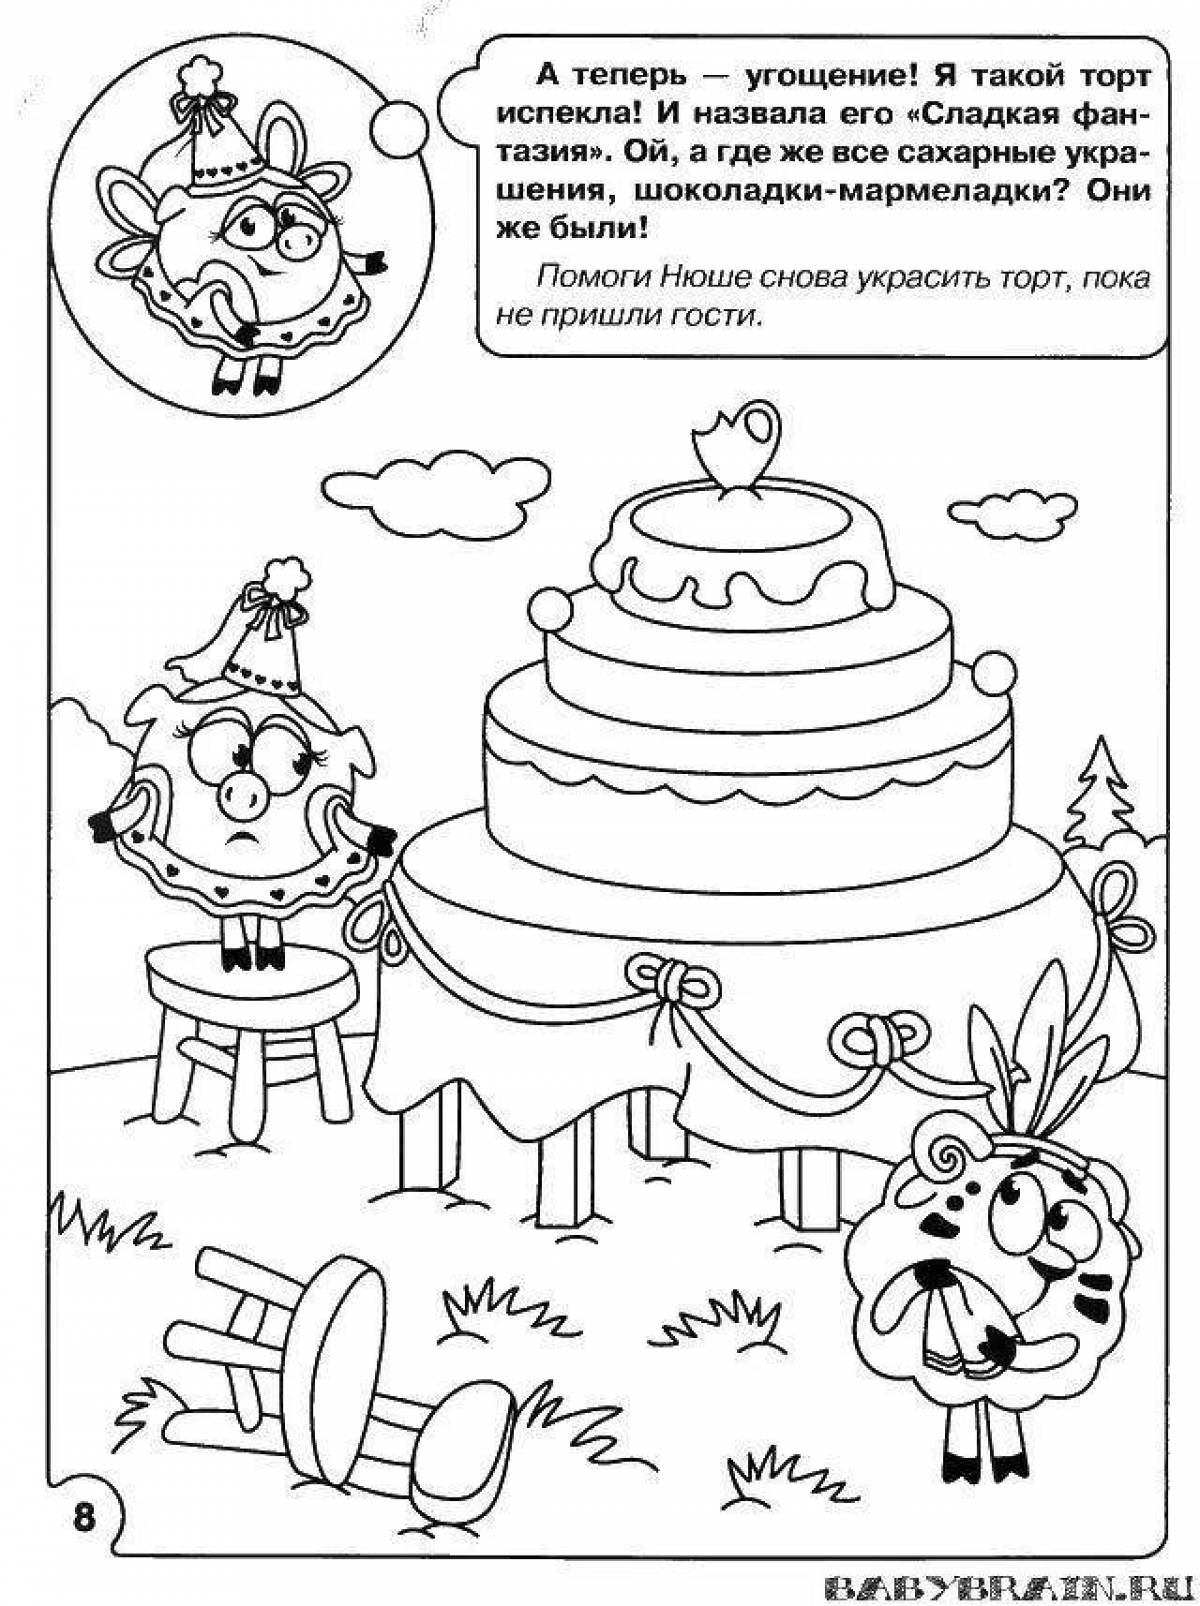 Outstanding smart smeshariki coloring pages